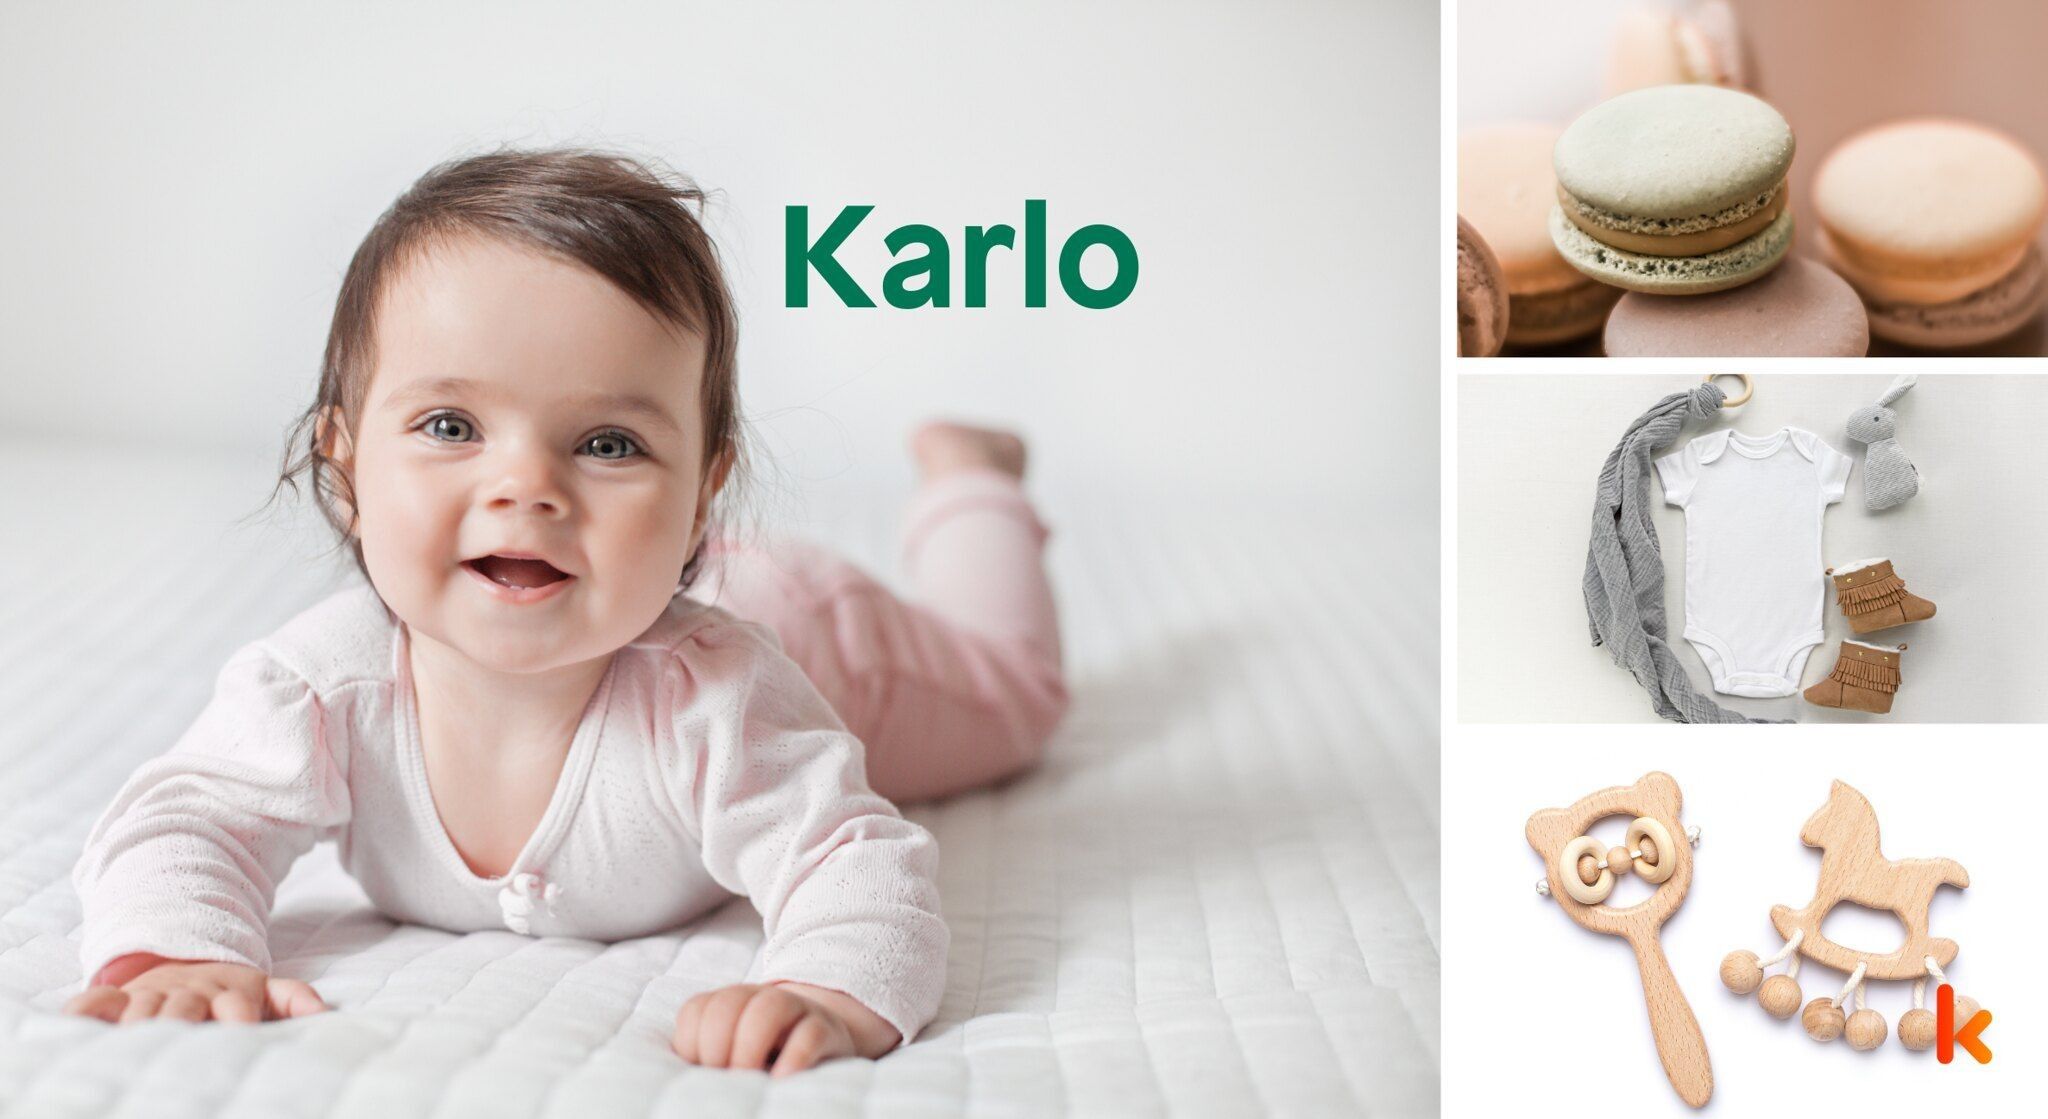 Meaning of the name Karlo